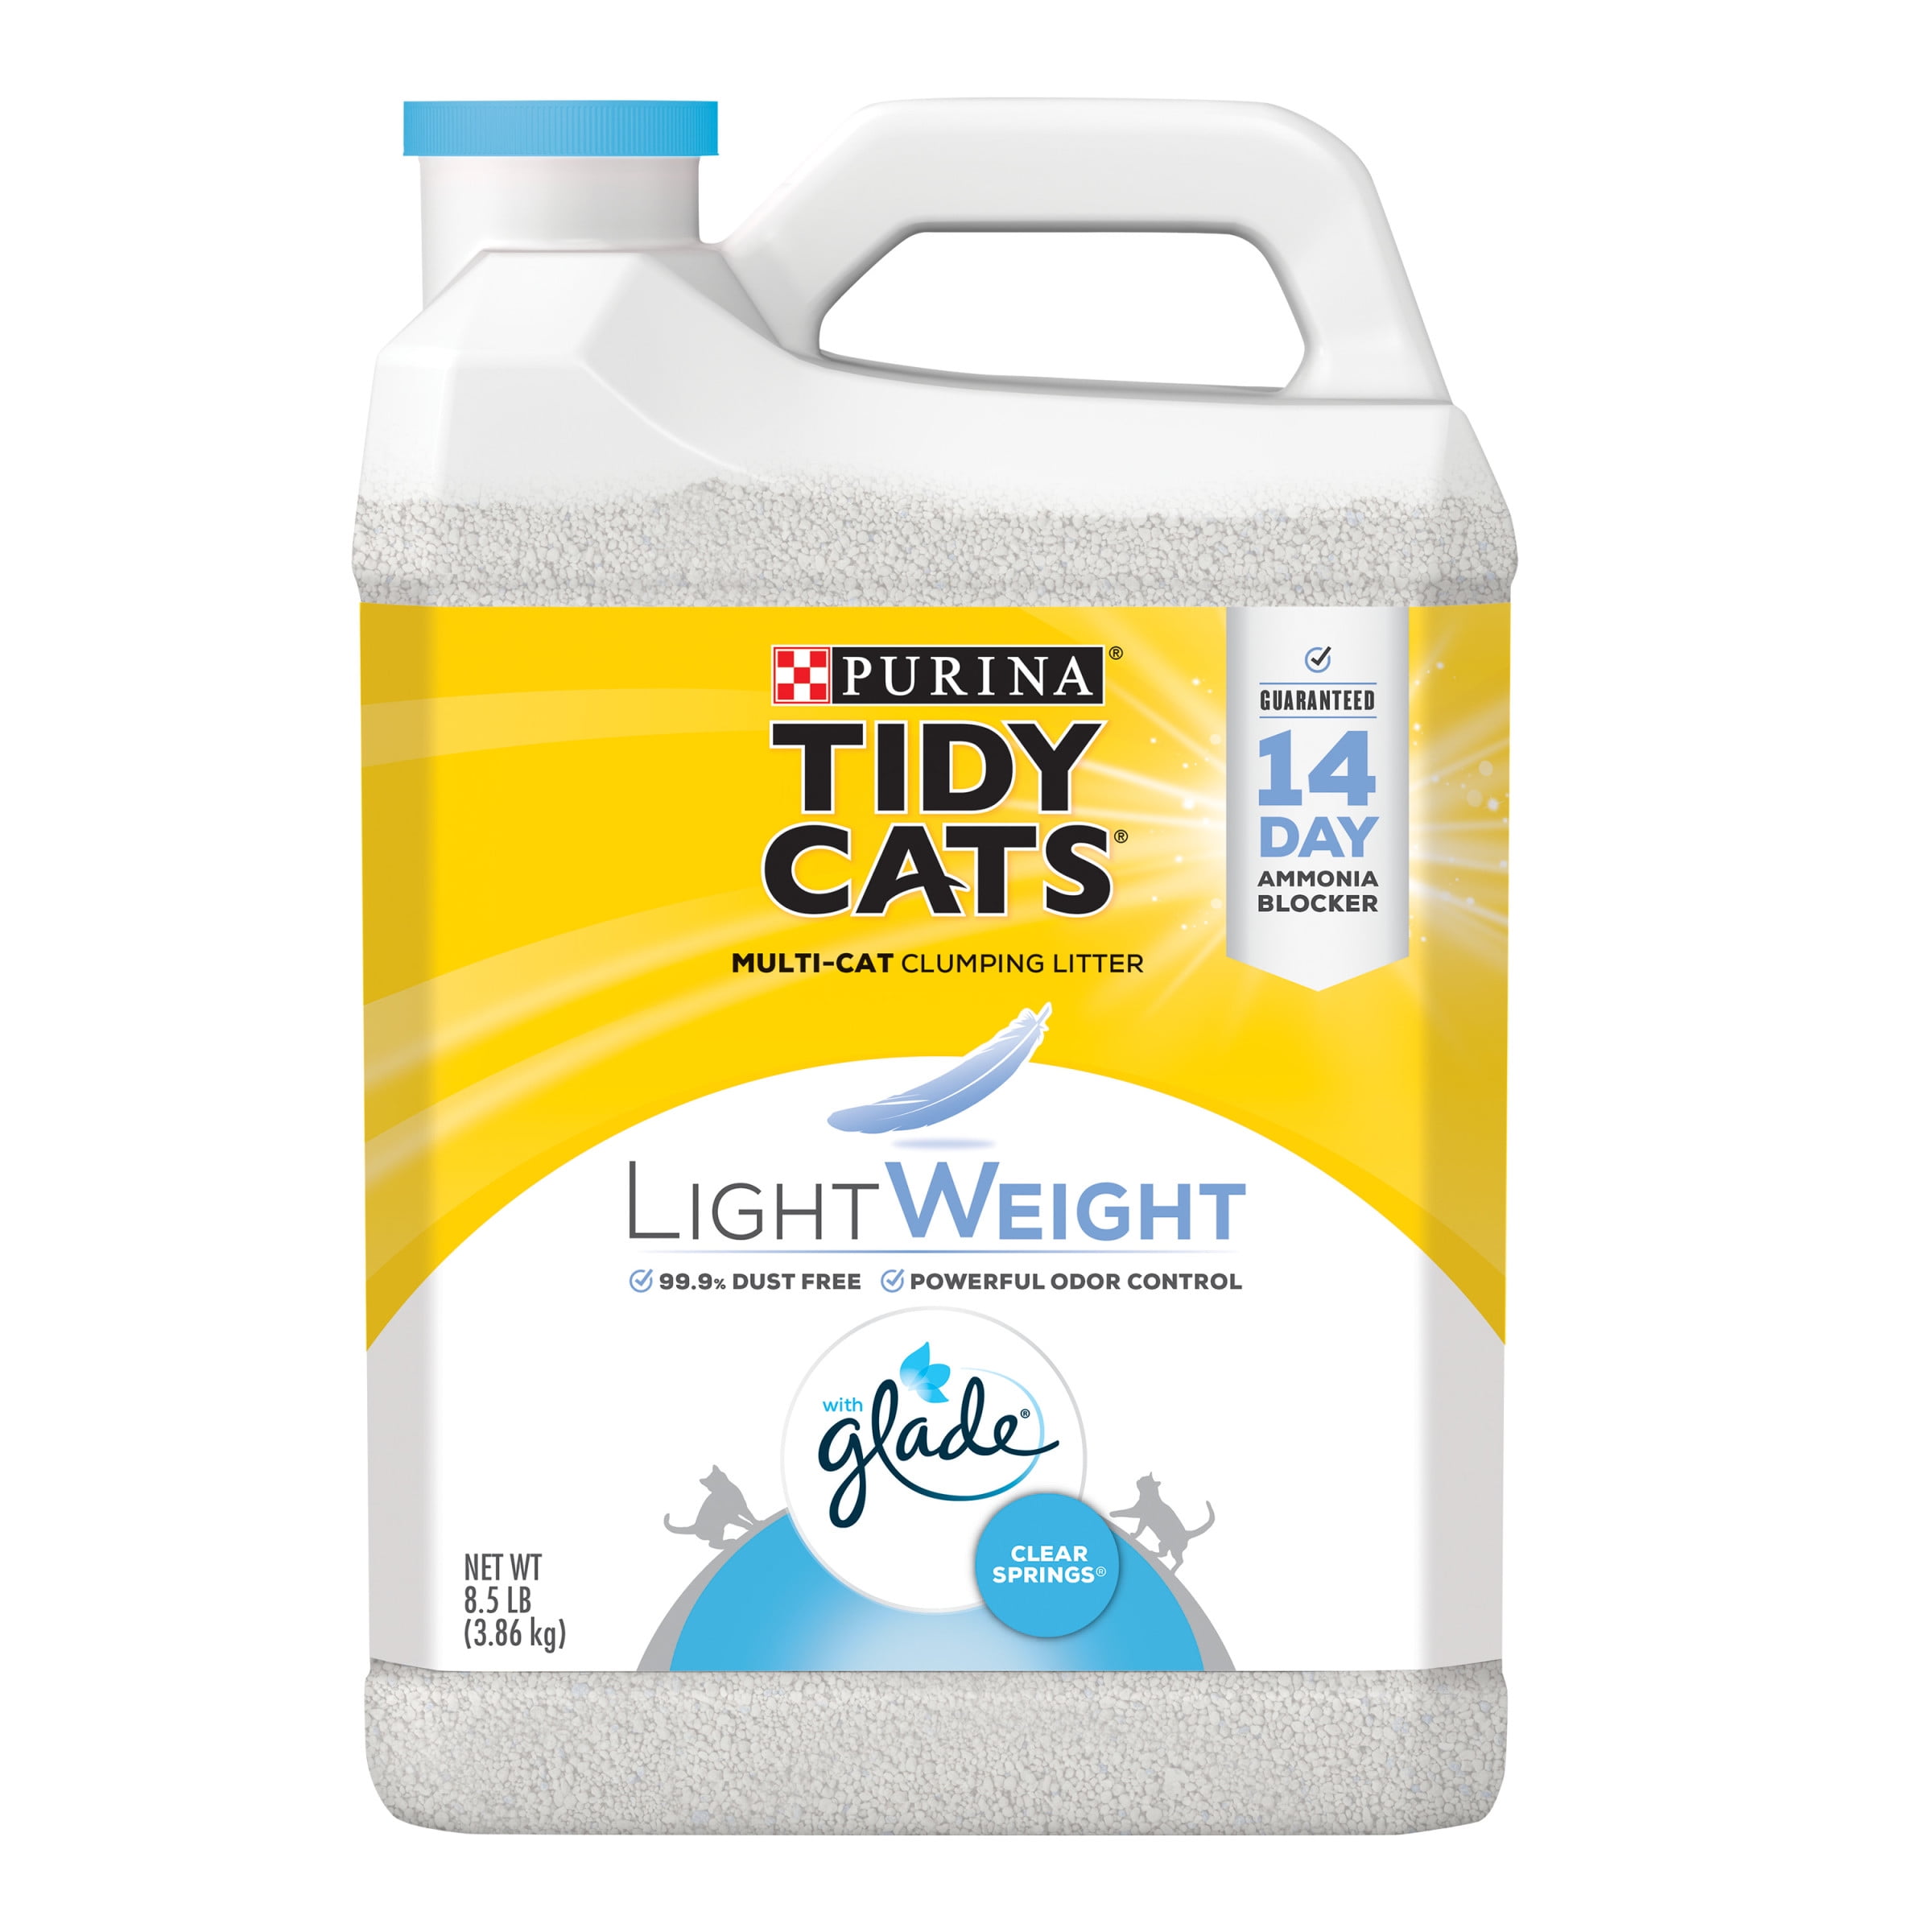 Purina Tidy Cats Low Dust Clumping Cat Litter, LightWeight Glade Clear Springs Multi Cat Litter, 8.5 lb. Jug